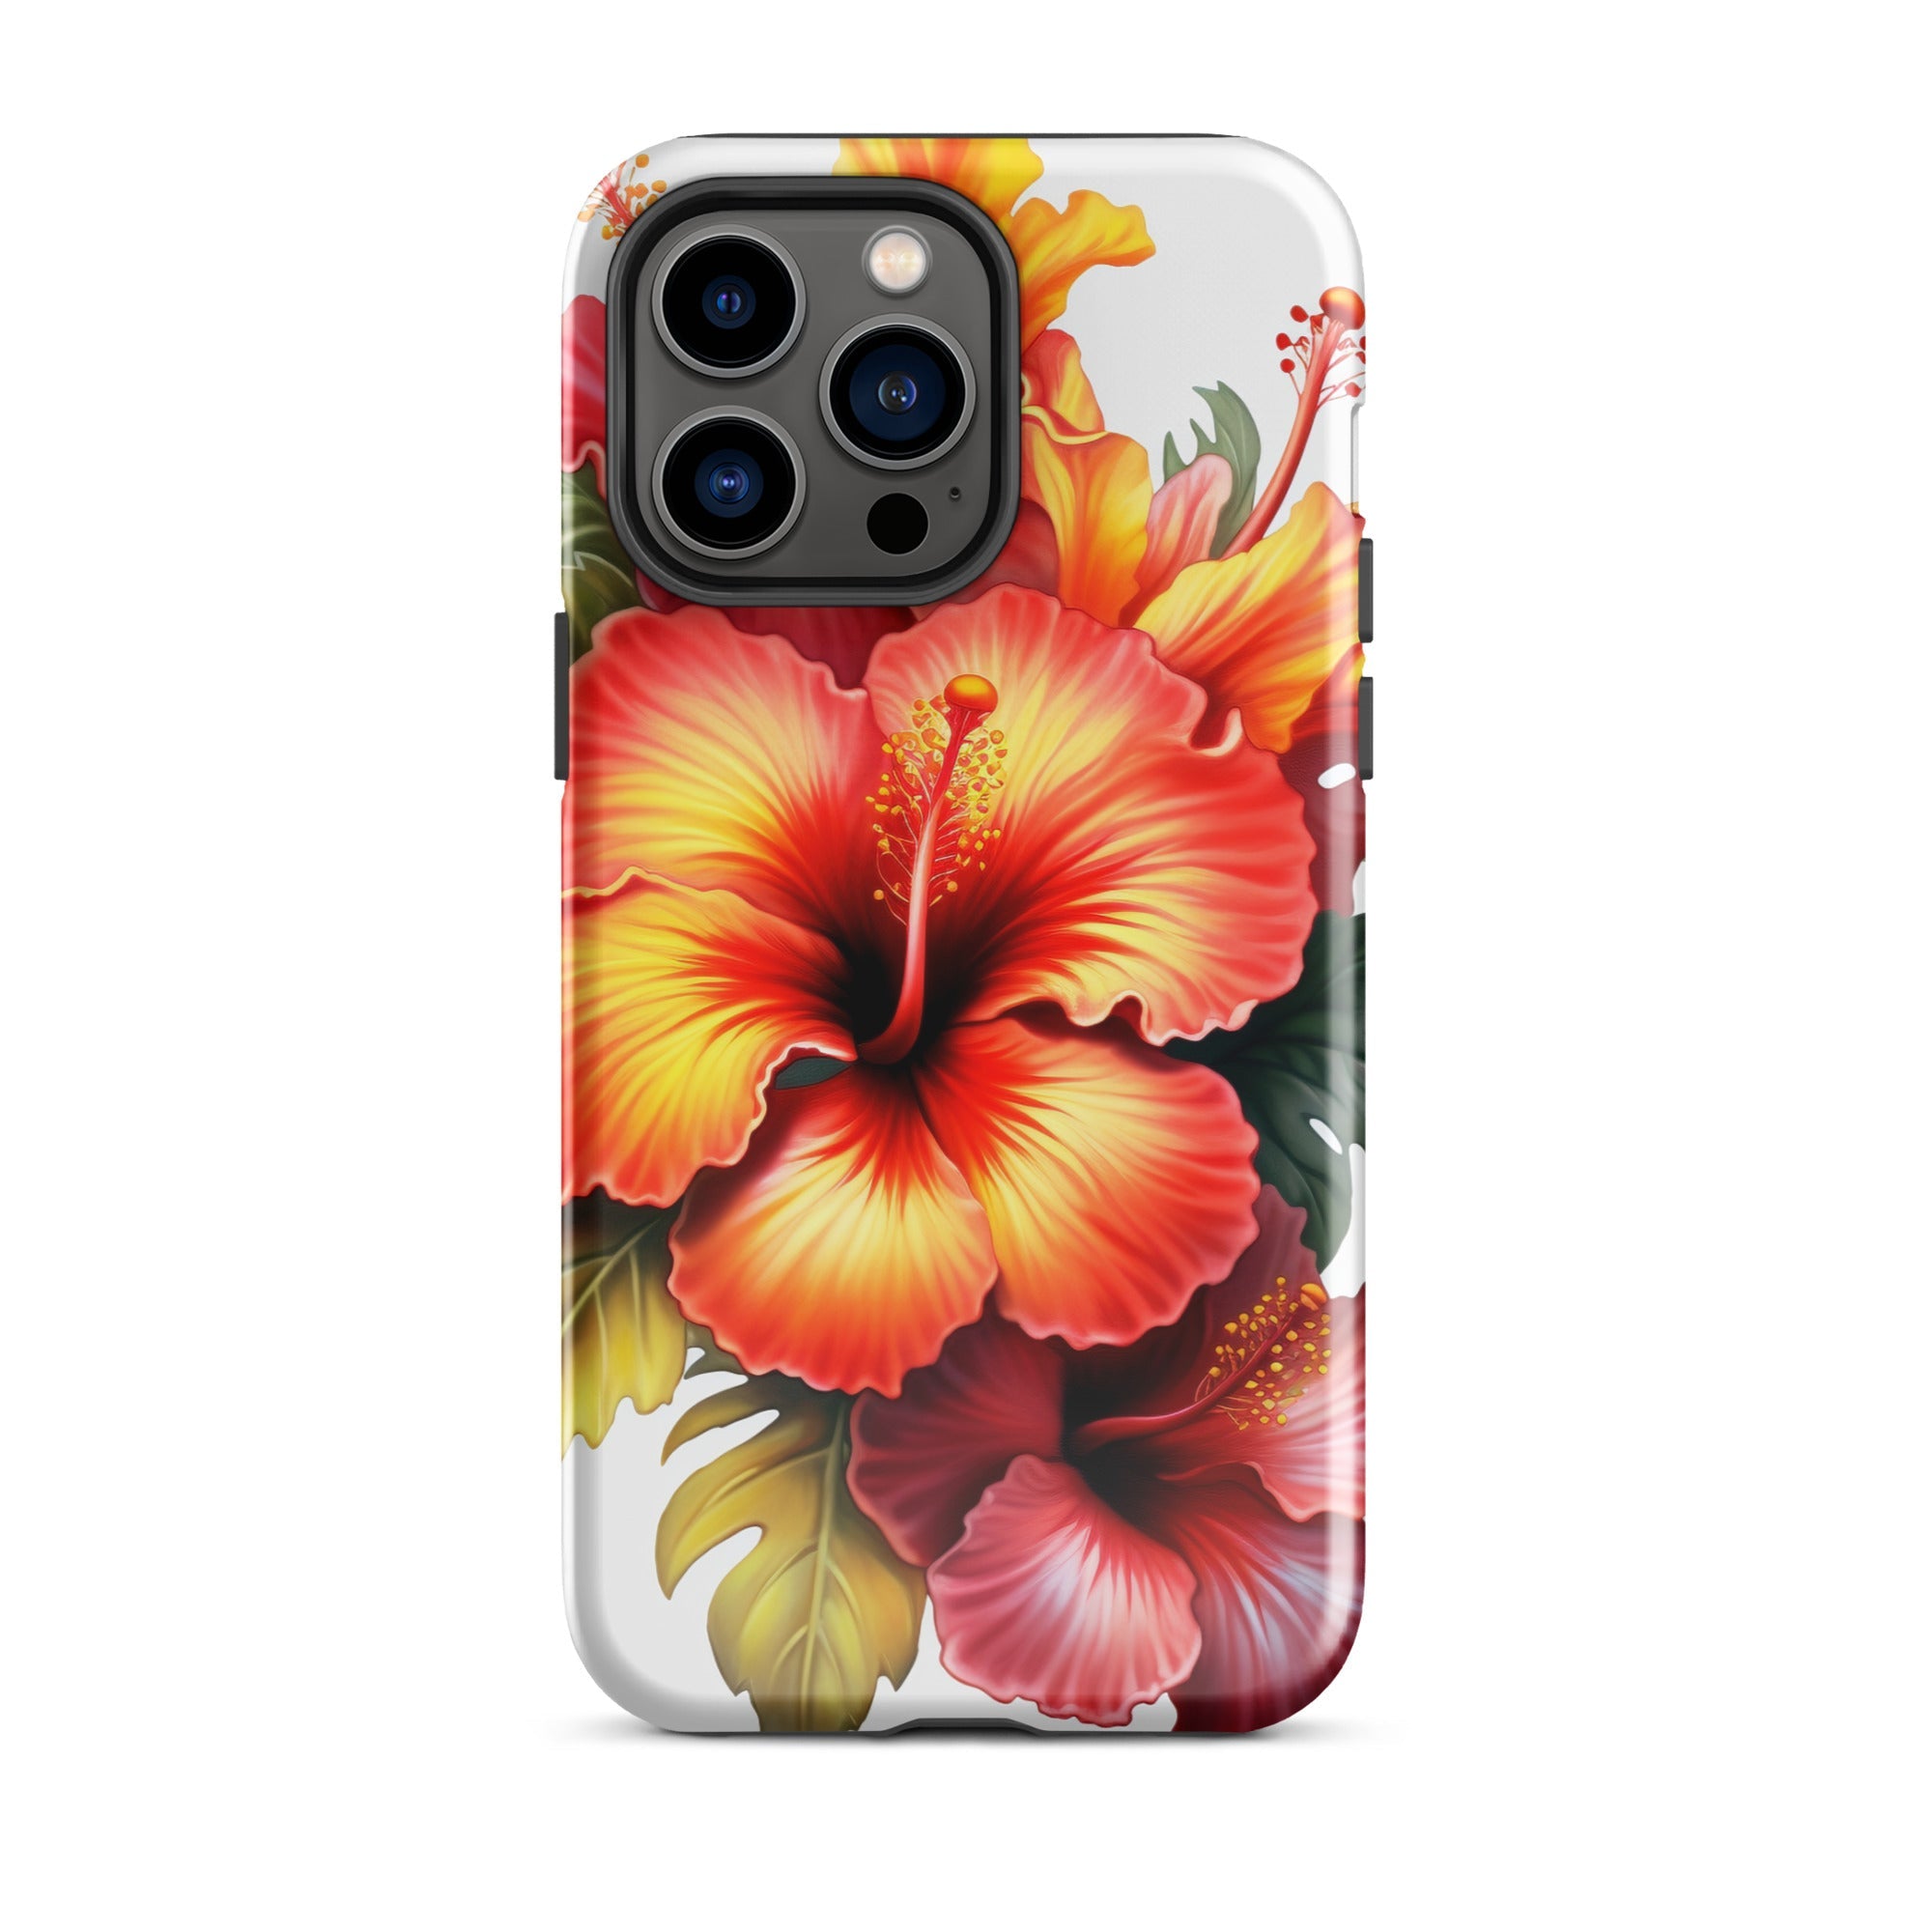 Hibiscus Flower iPhone Case by Visual Verse - Image 29